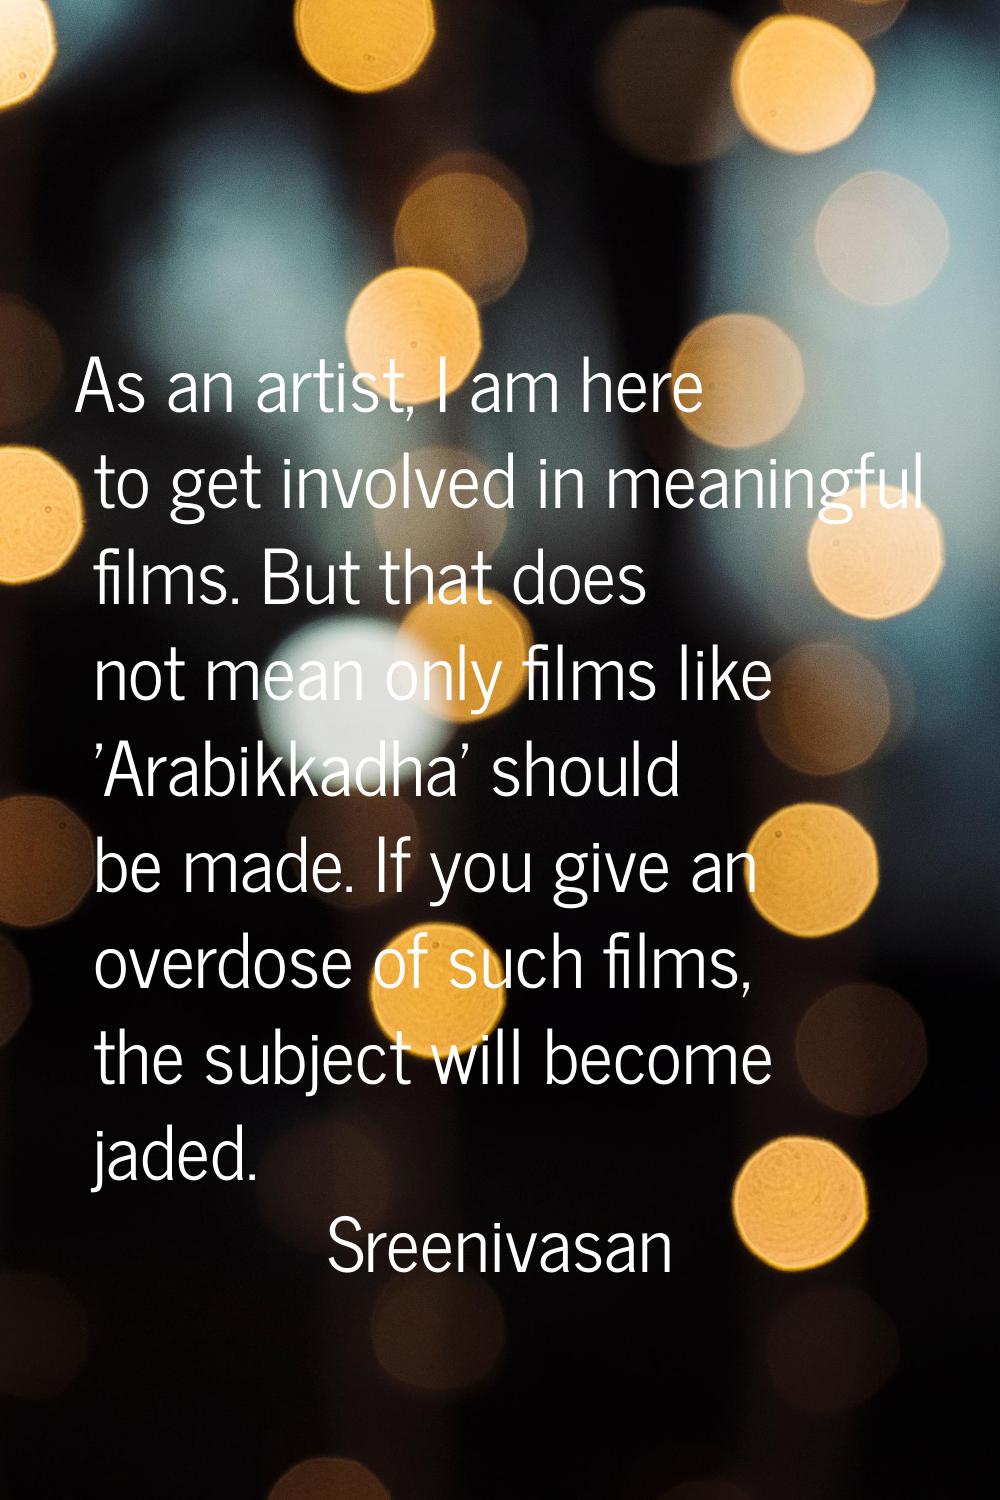 As an artist, I am here to get involved in meaningful films. But that does not mean only films like